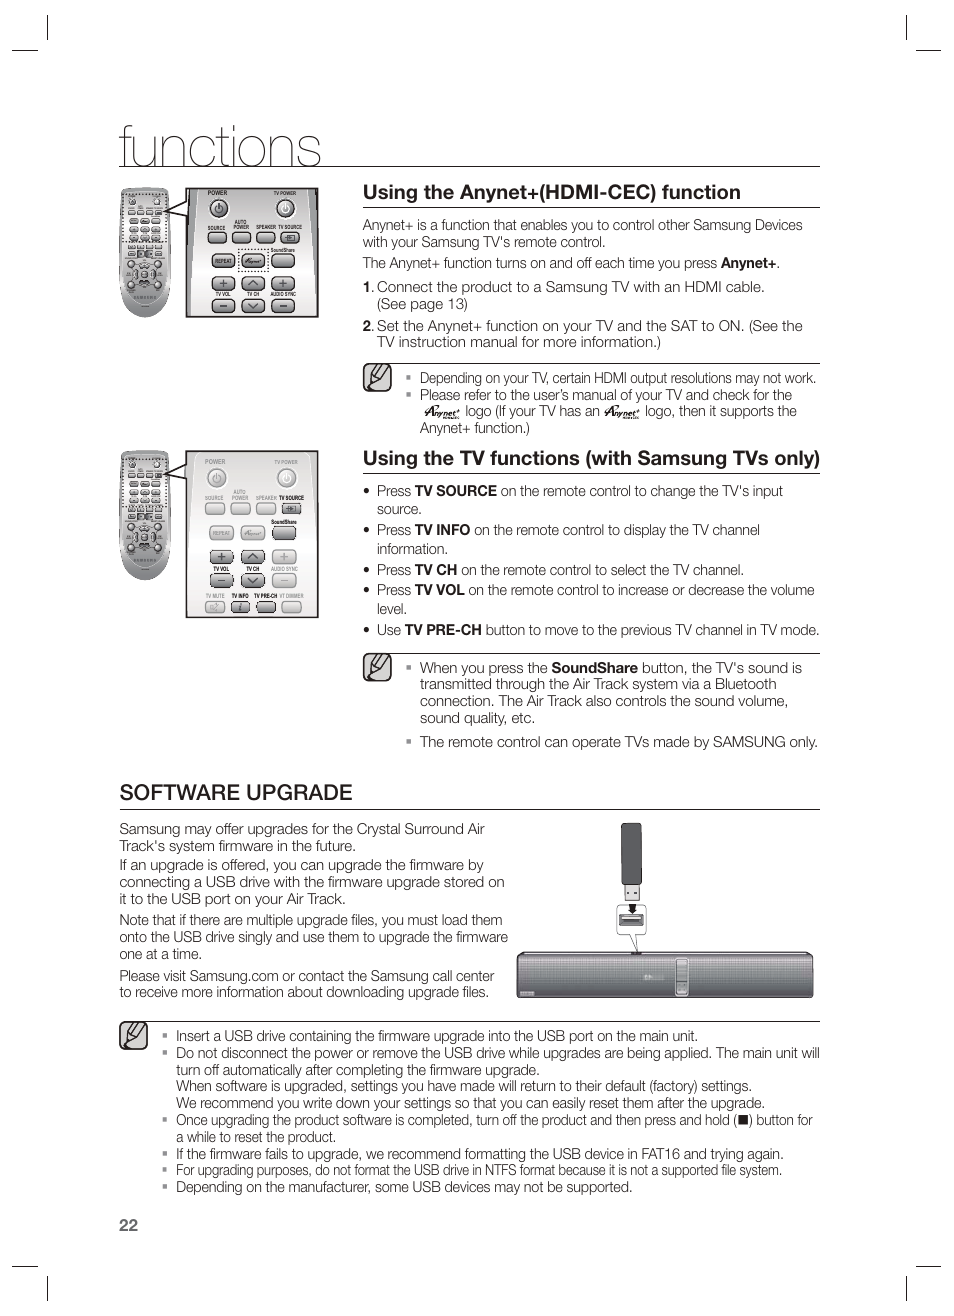 Software upgrade, Functions, Using the anynet+(hdmi-cec) function | Samsung  HW-F750-ZA User Manual | Page 22 / 26 | Original mode